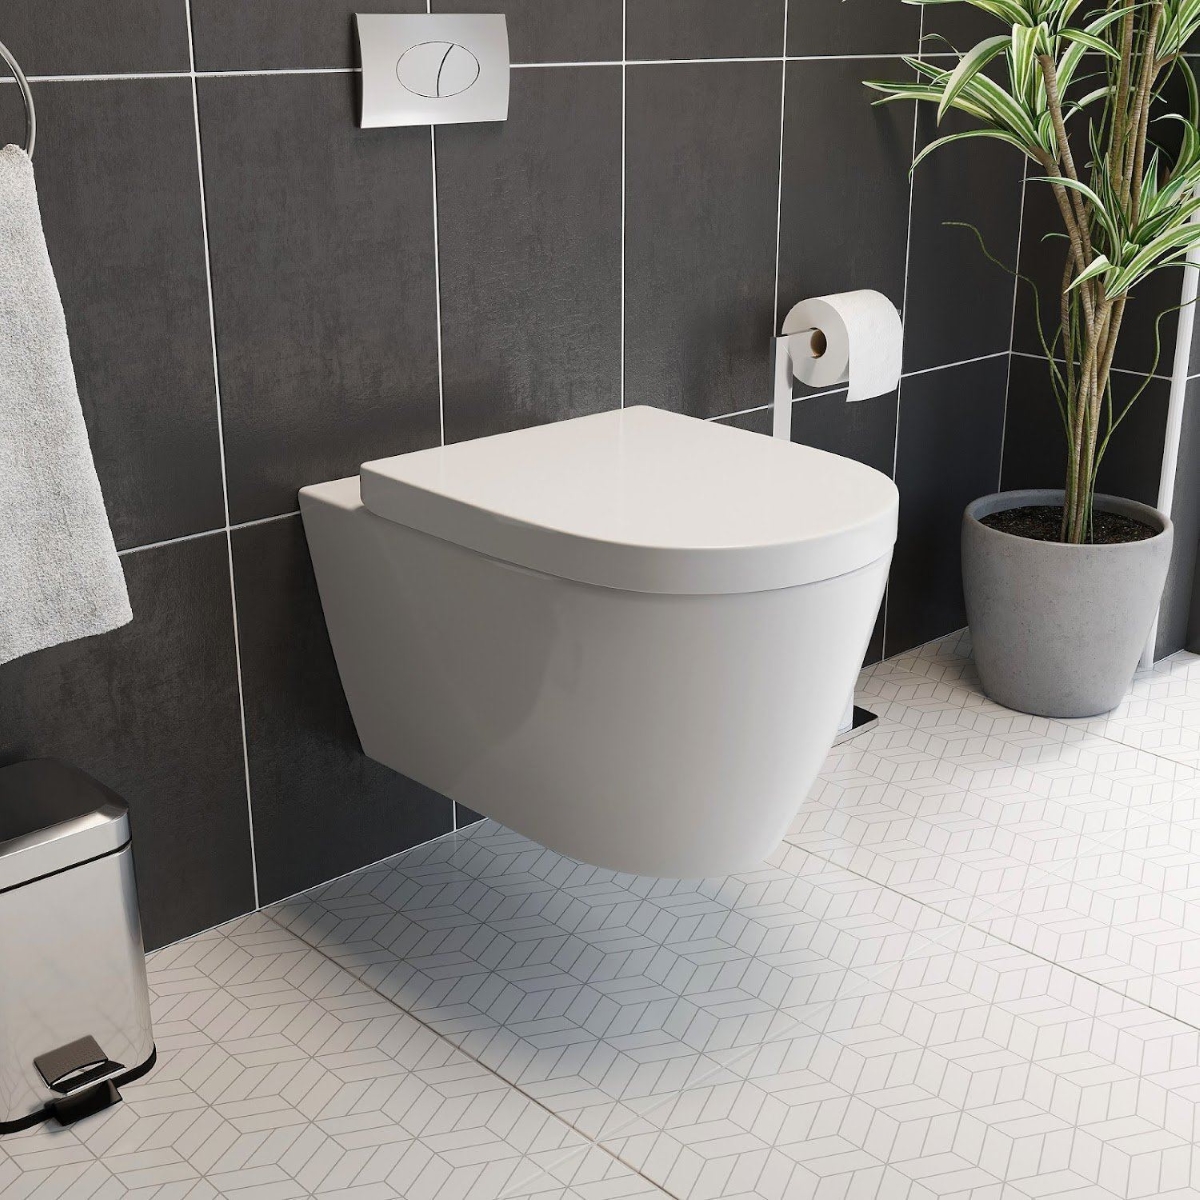 types of toilets - wall mounted toilet